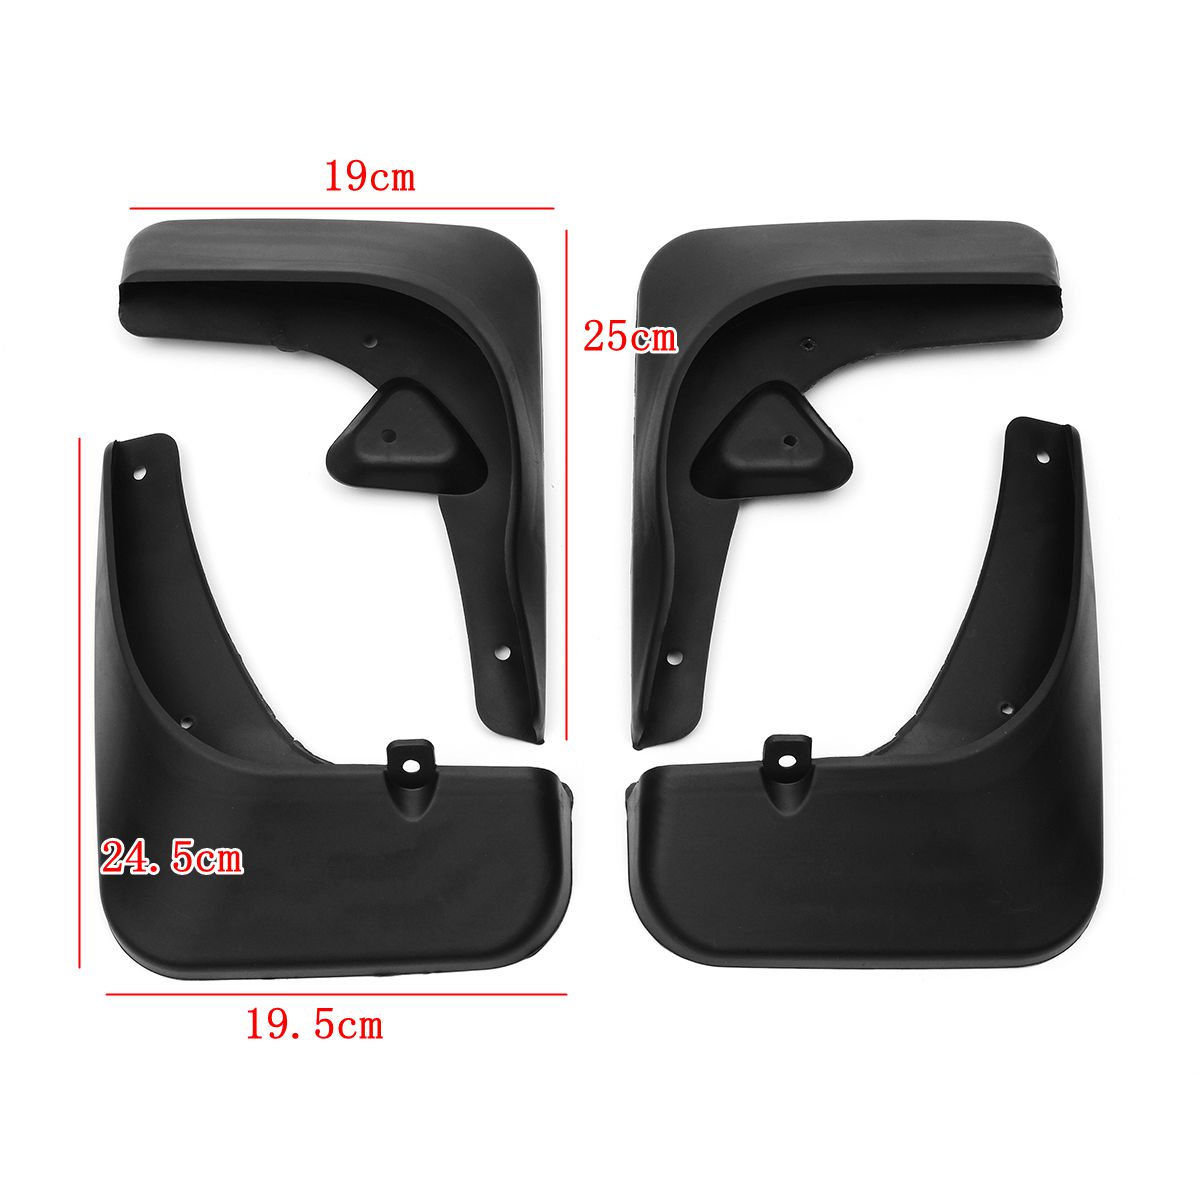 4Pcs-Front-And-Rear-Mud-Flaps-Car-Mudguards-For-Peugeot-Sedan-408-2010-2015-1389187